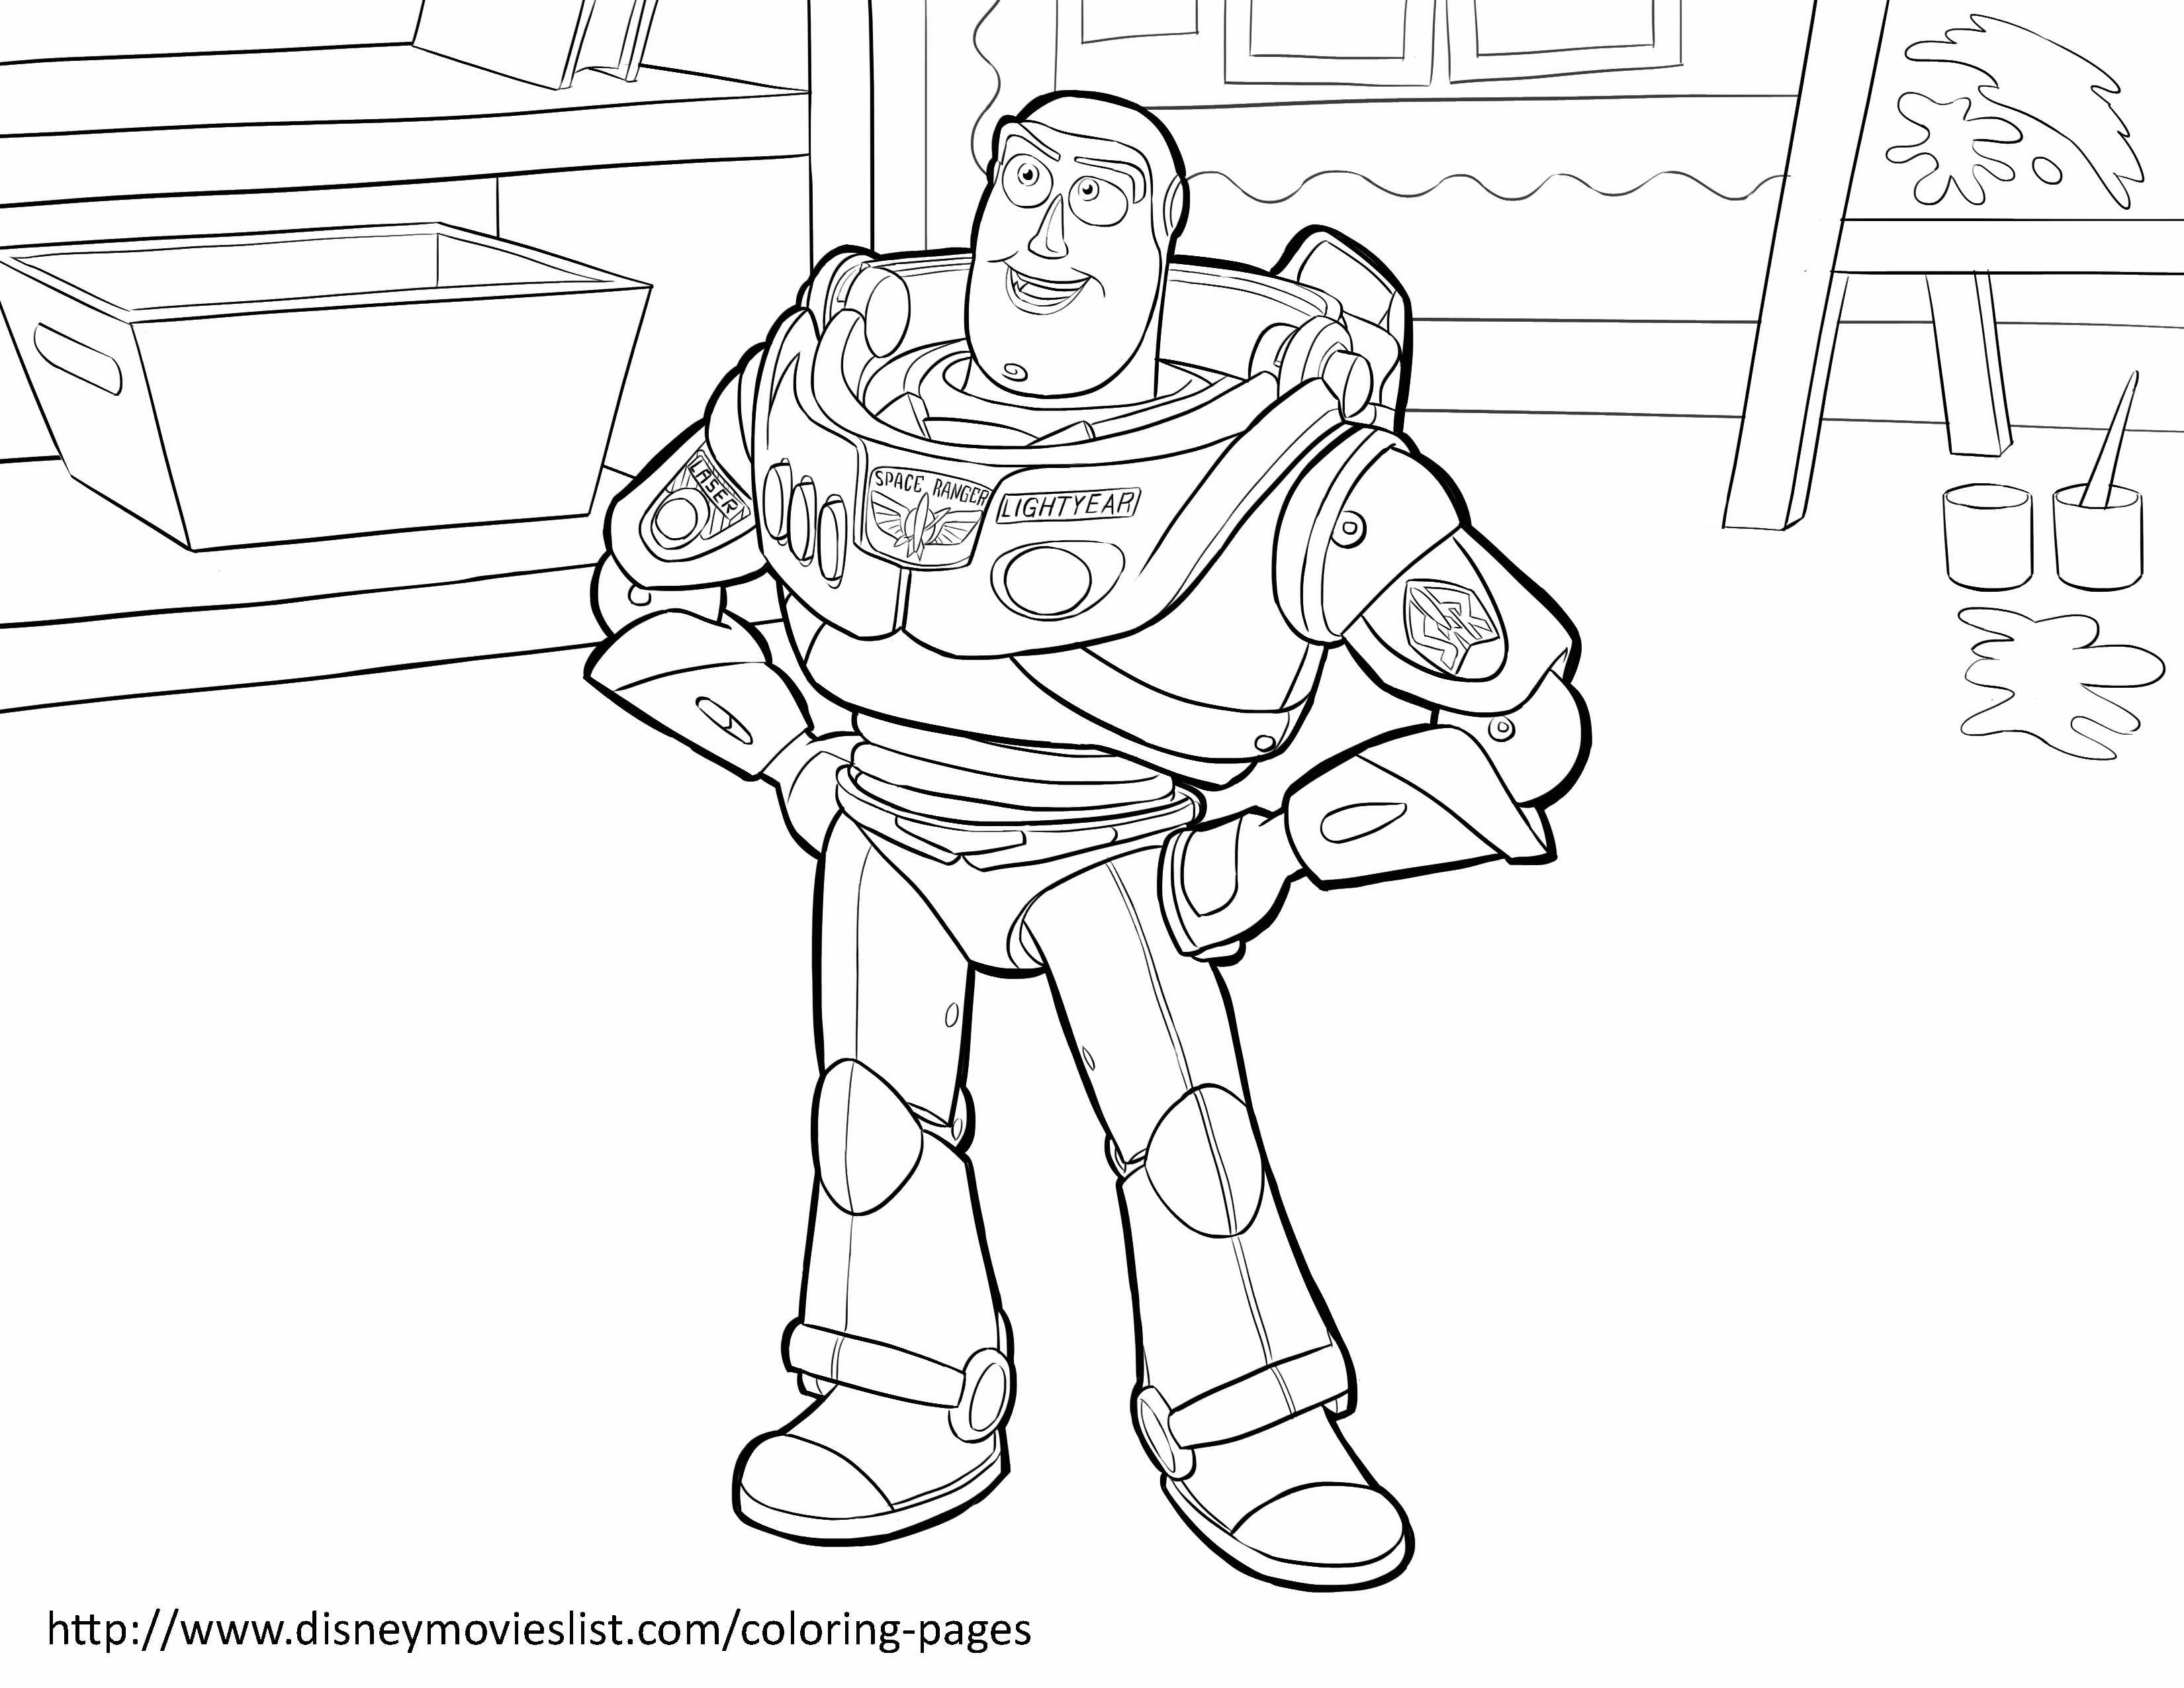 Disney's Toy Story Coloring Pages Sheet, Free Disney Printable Toy ...